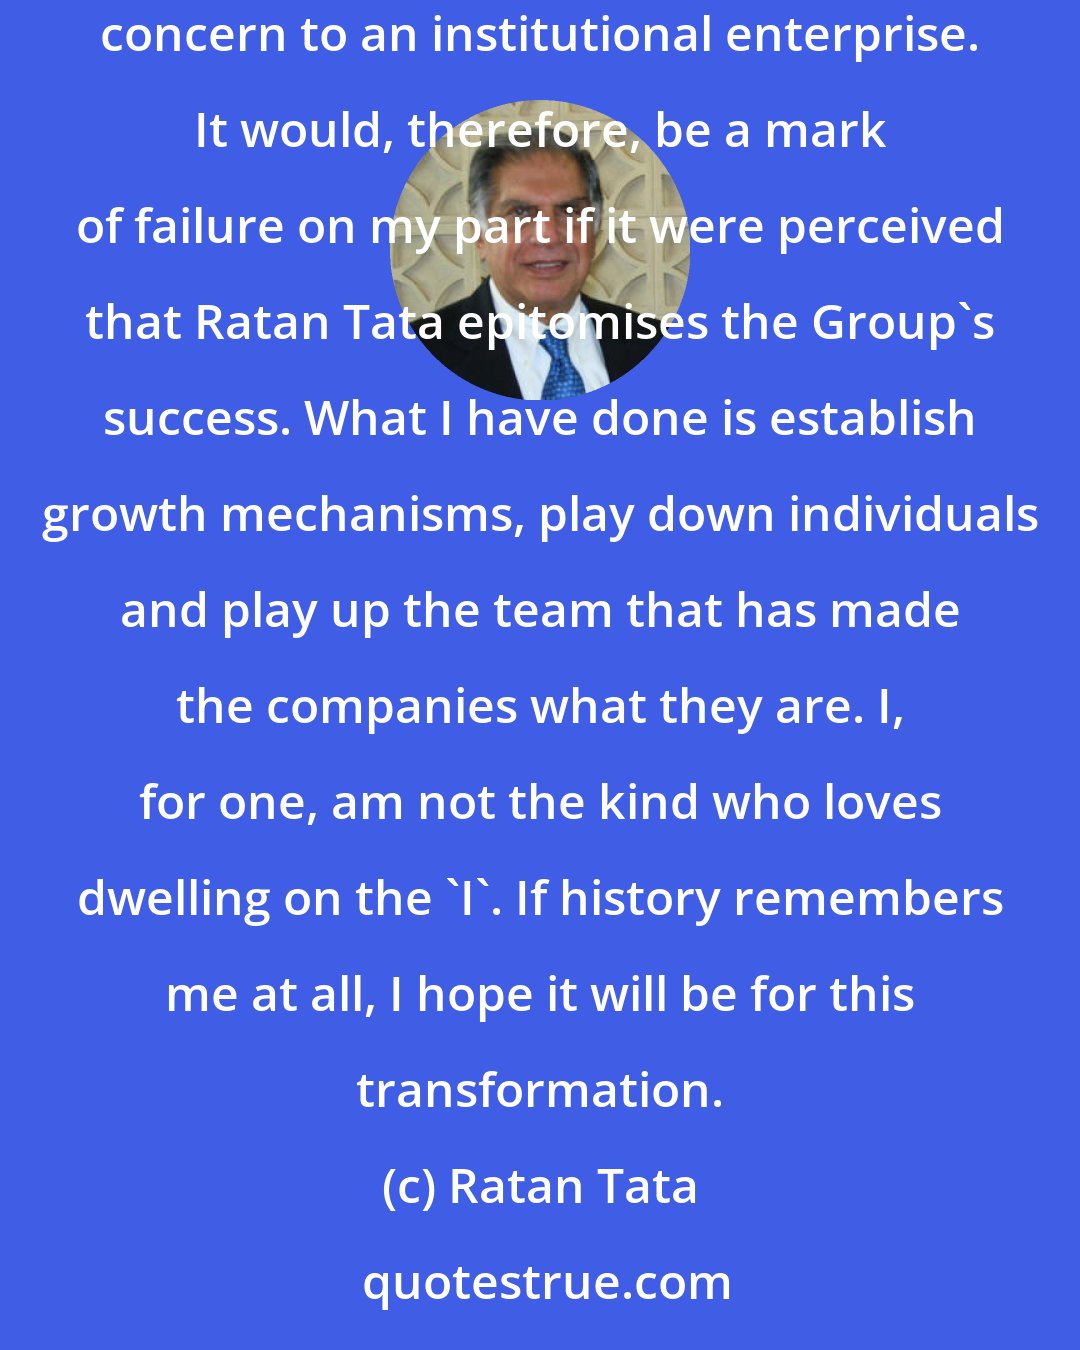 Ratan Tata: I do not know how history will judge me, but let me say that I've spent a lot of time and energy trying to transform the Tatas from a patriarchal concern to an institutional enterprise. It would, therefore, be a mark of failure on my part if it were perceived that Ratan Tata epitomises the Group's success. What I have done is establish growth mechanisms, play down individuals and play up the team that has made the companies what they are. I, for one, am not the kind who loves dwelling on the 'I'. If history remembers me at all, I hope it will be for this transformation.